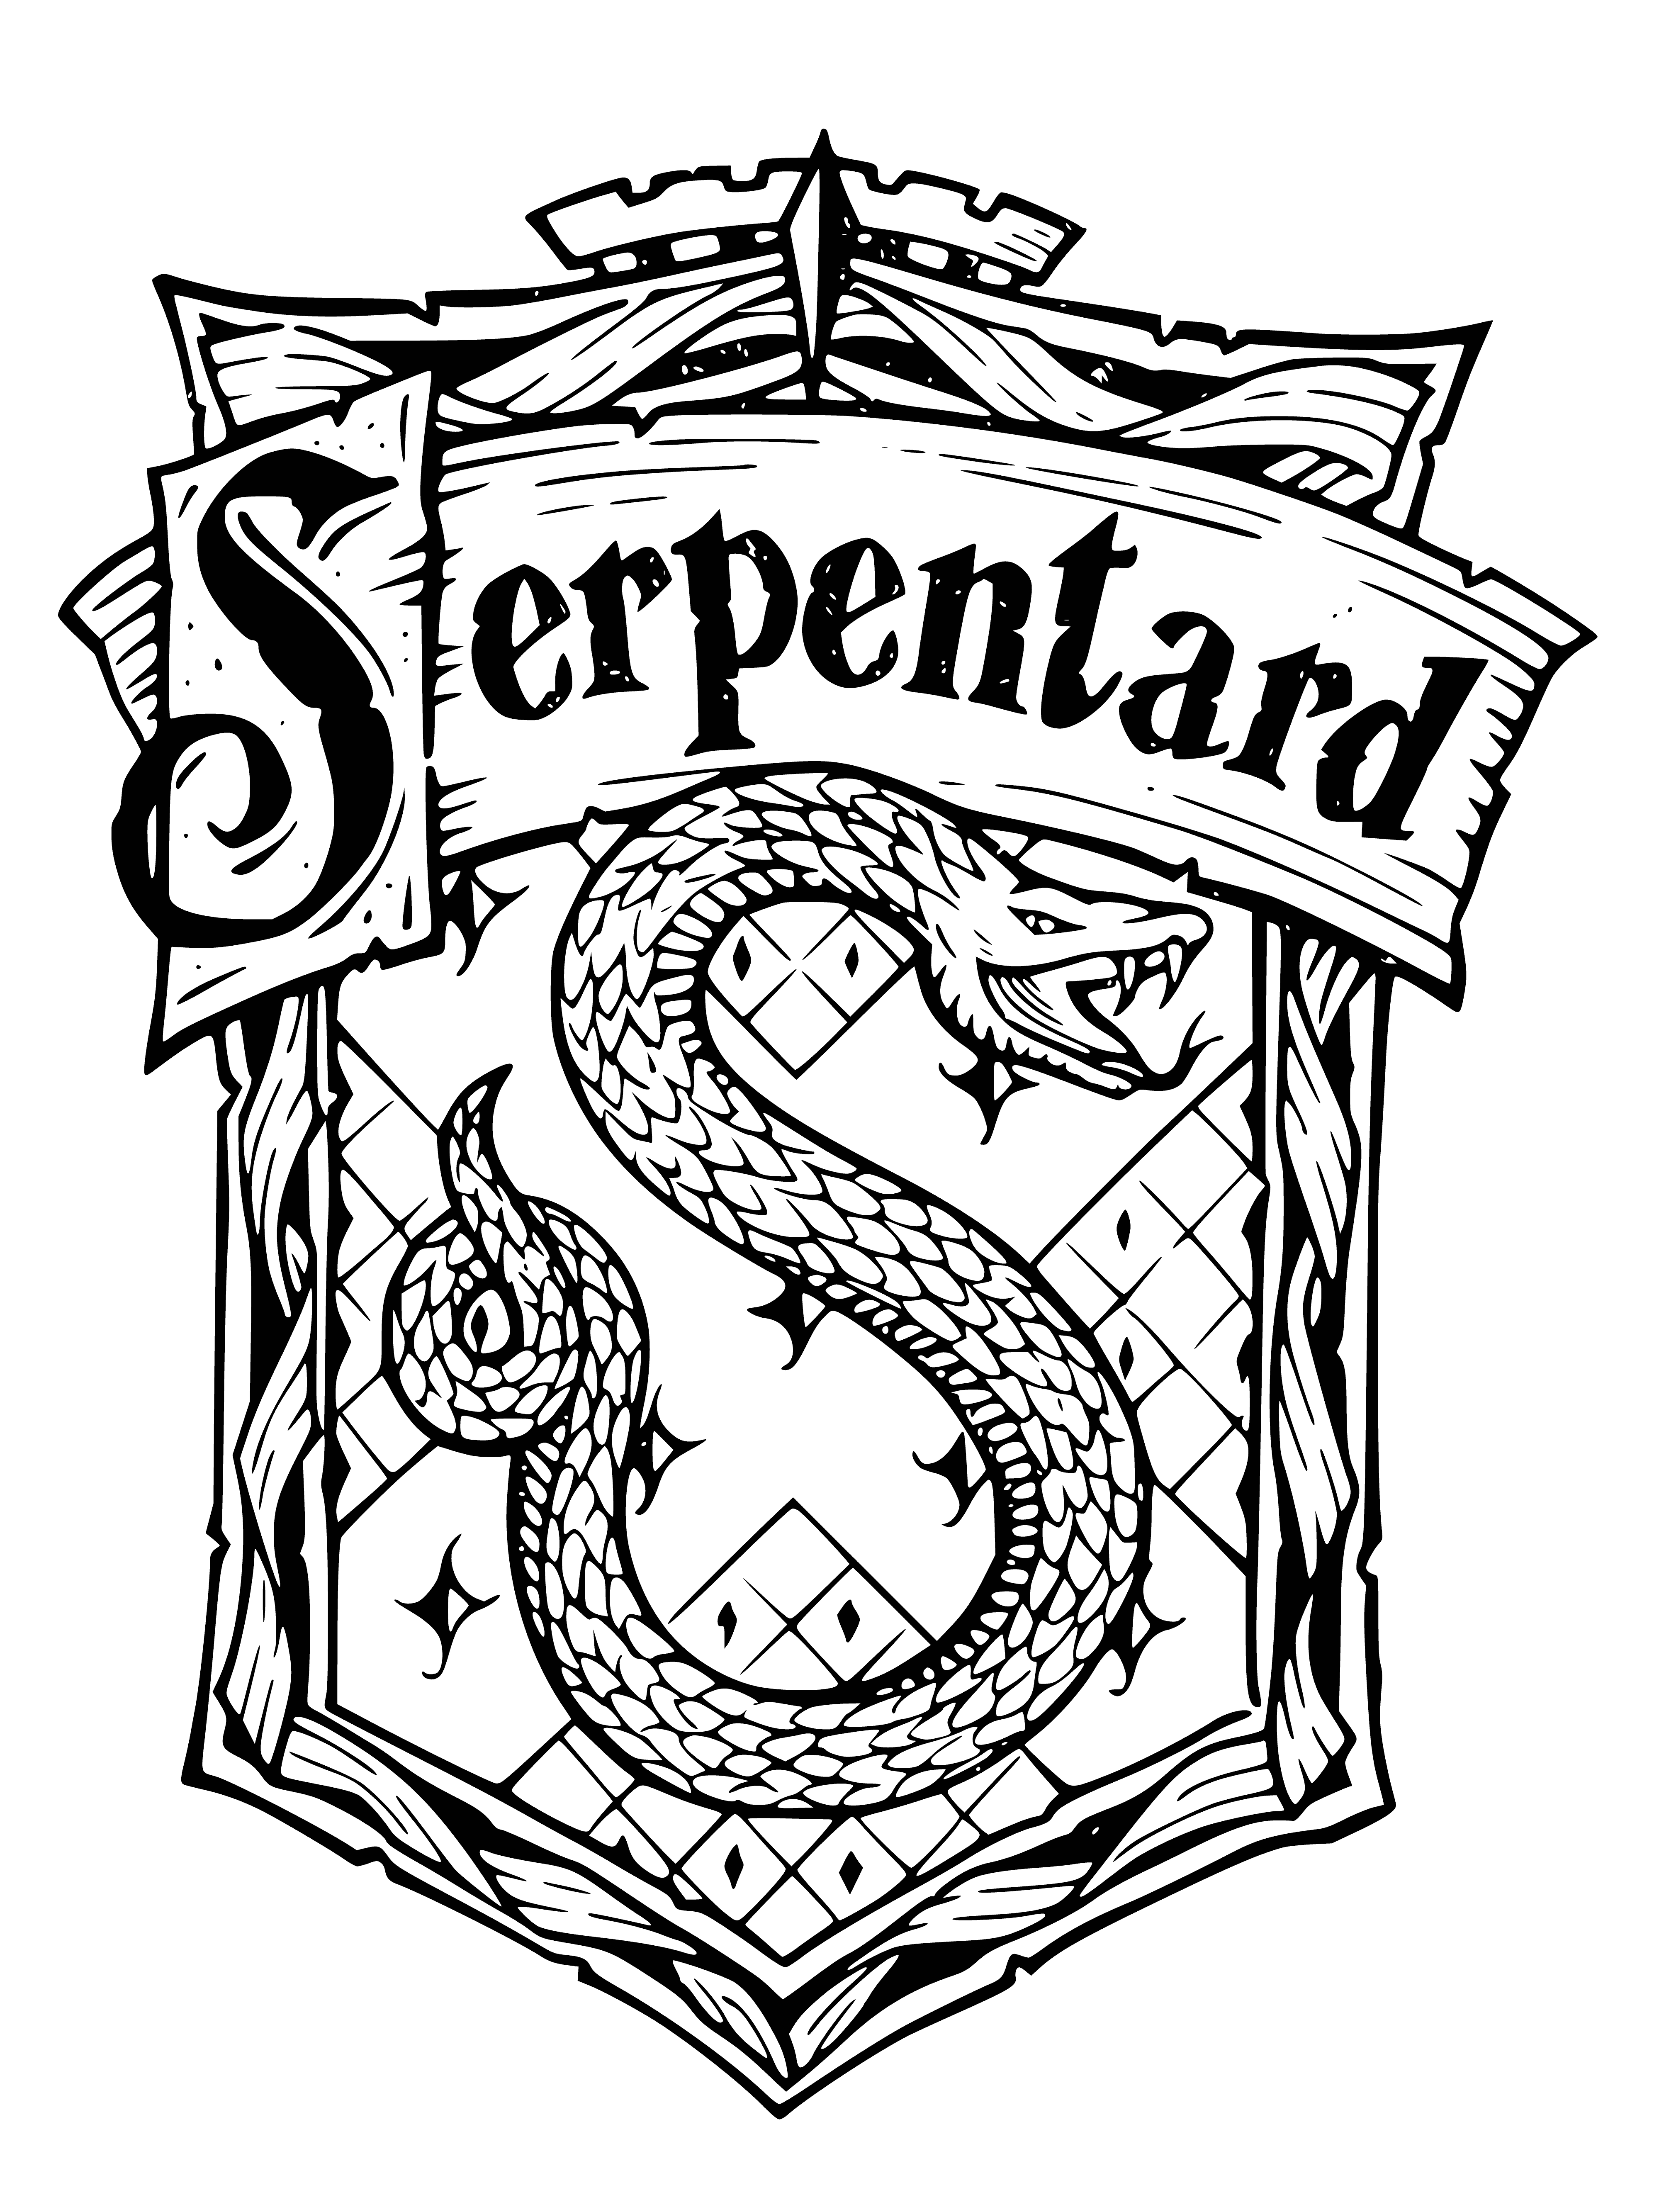 Coat of arms Slytherin coloring page